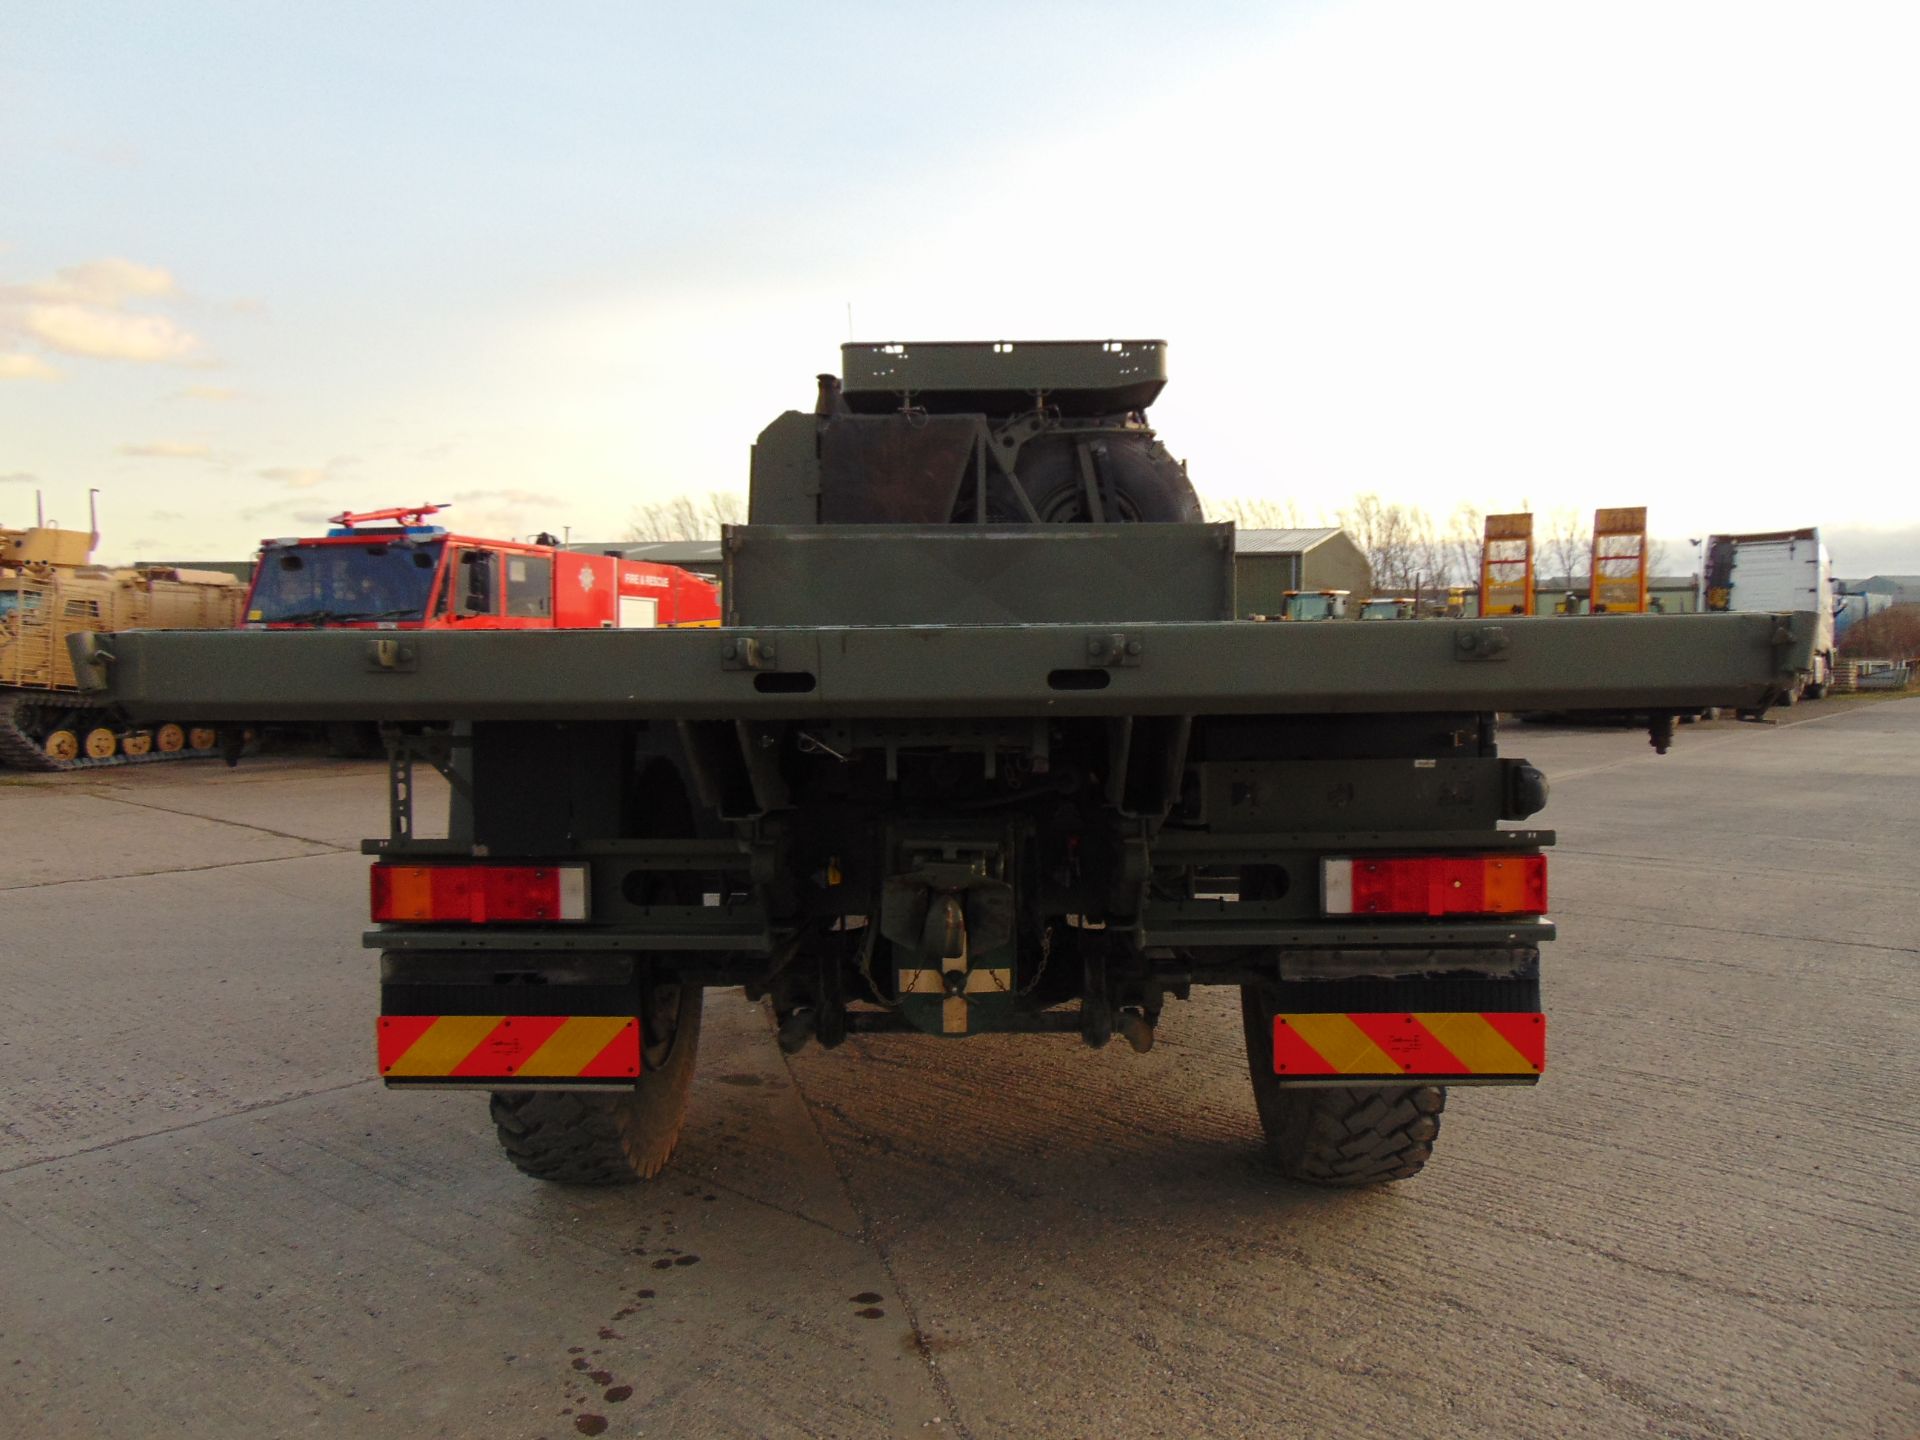 Recent Release MAN 4X4 HX60 18.330 FLAT BED CARGO TRUCK - Image 7 of 25